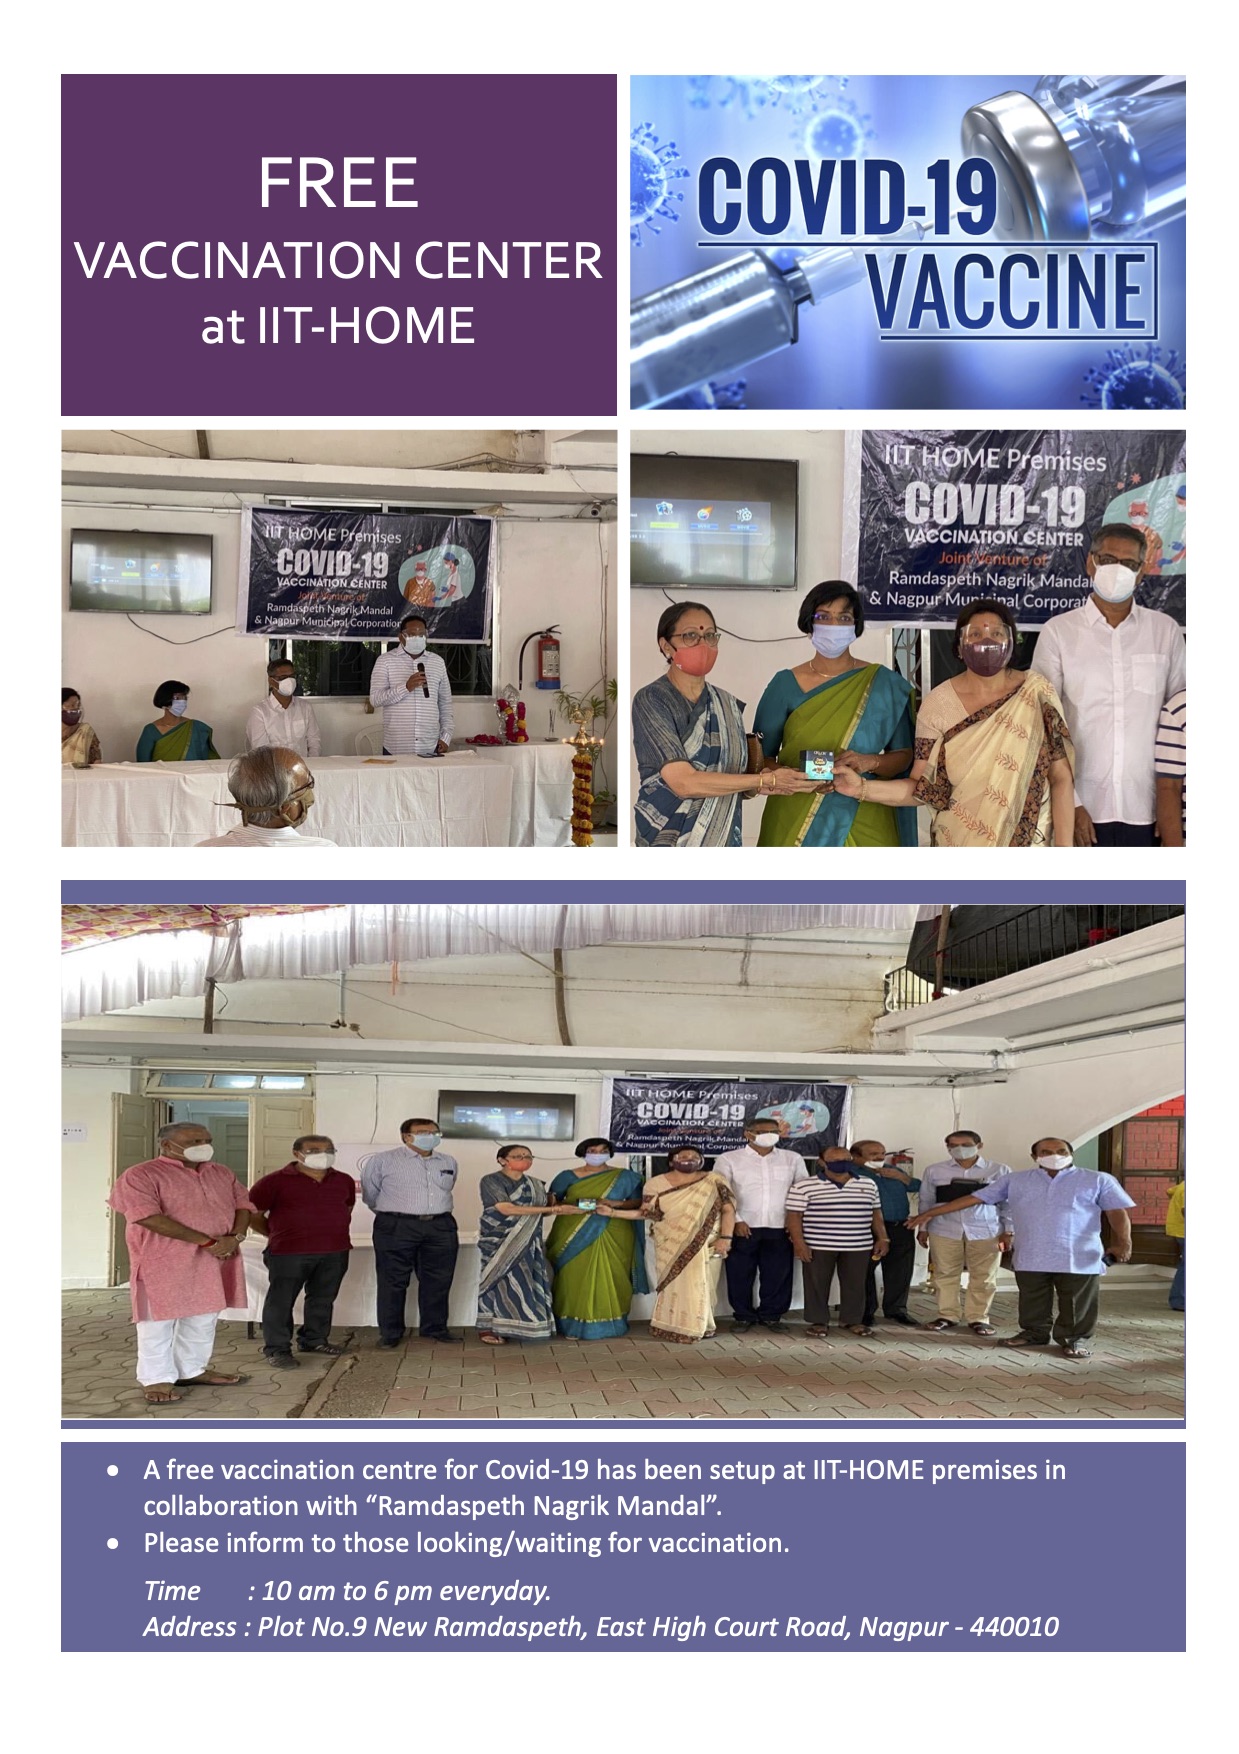 Free Covid-19 Vaccination Center at IIT-HOME